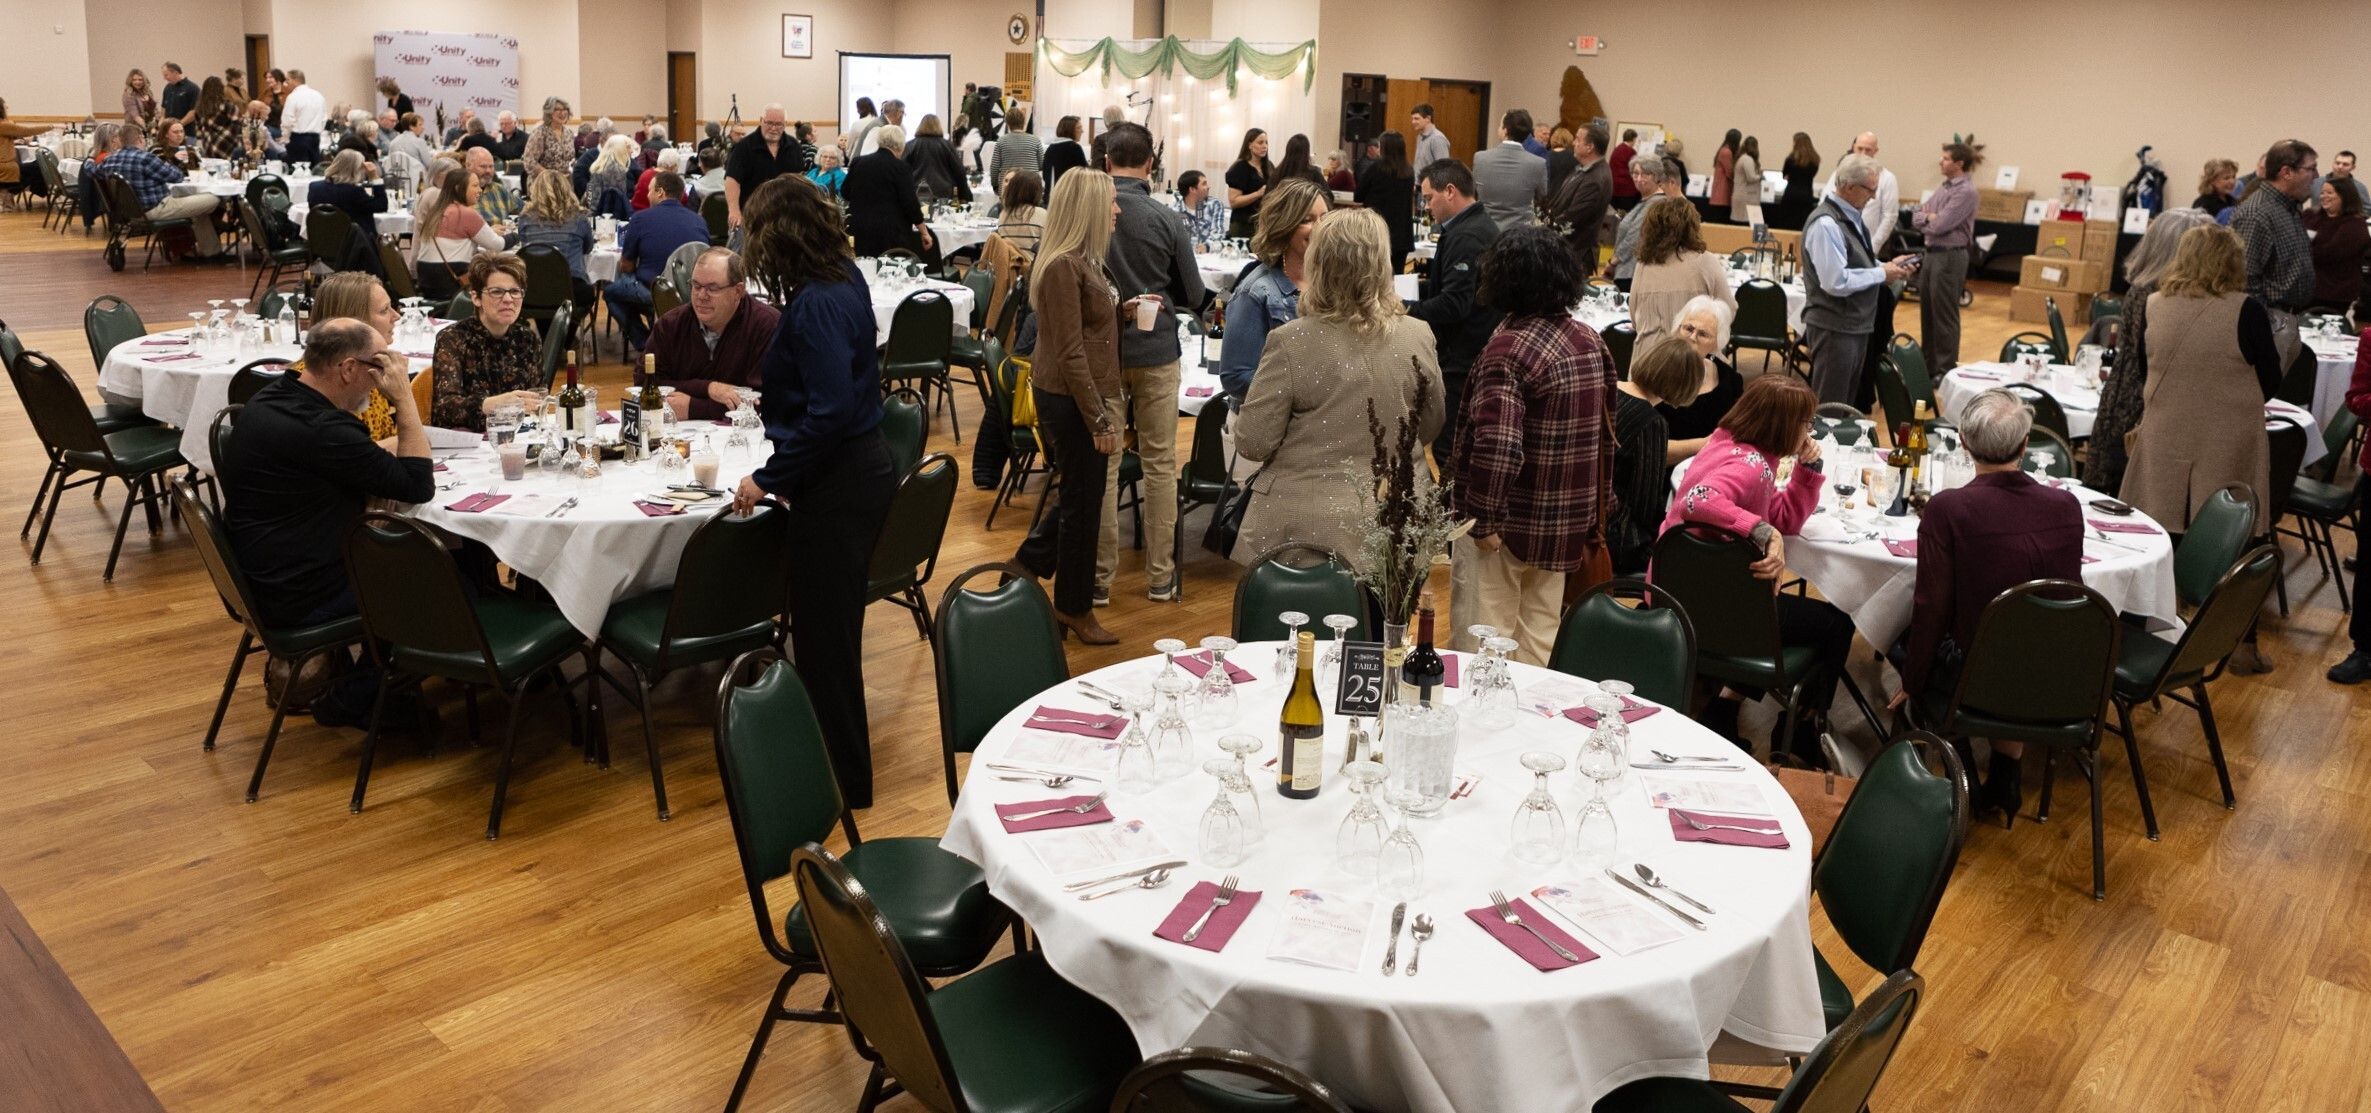 25th Annual Harvest Auction